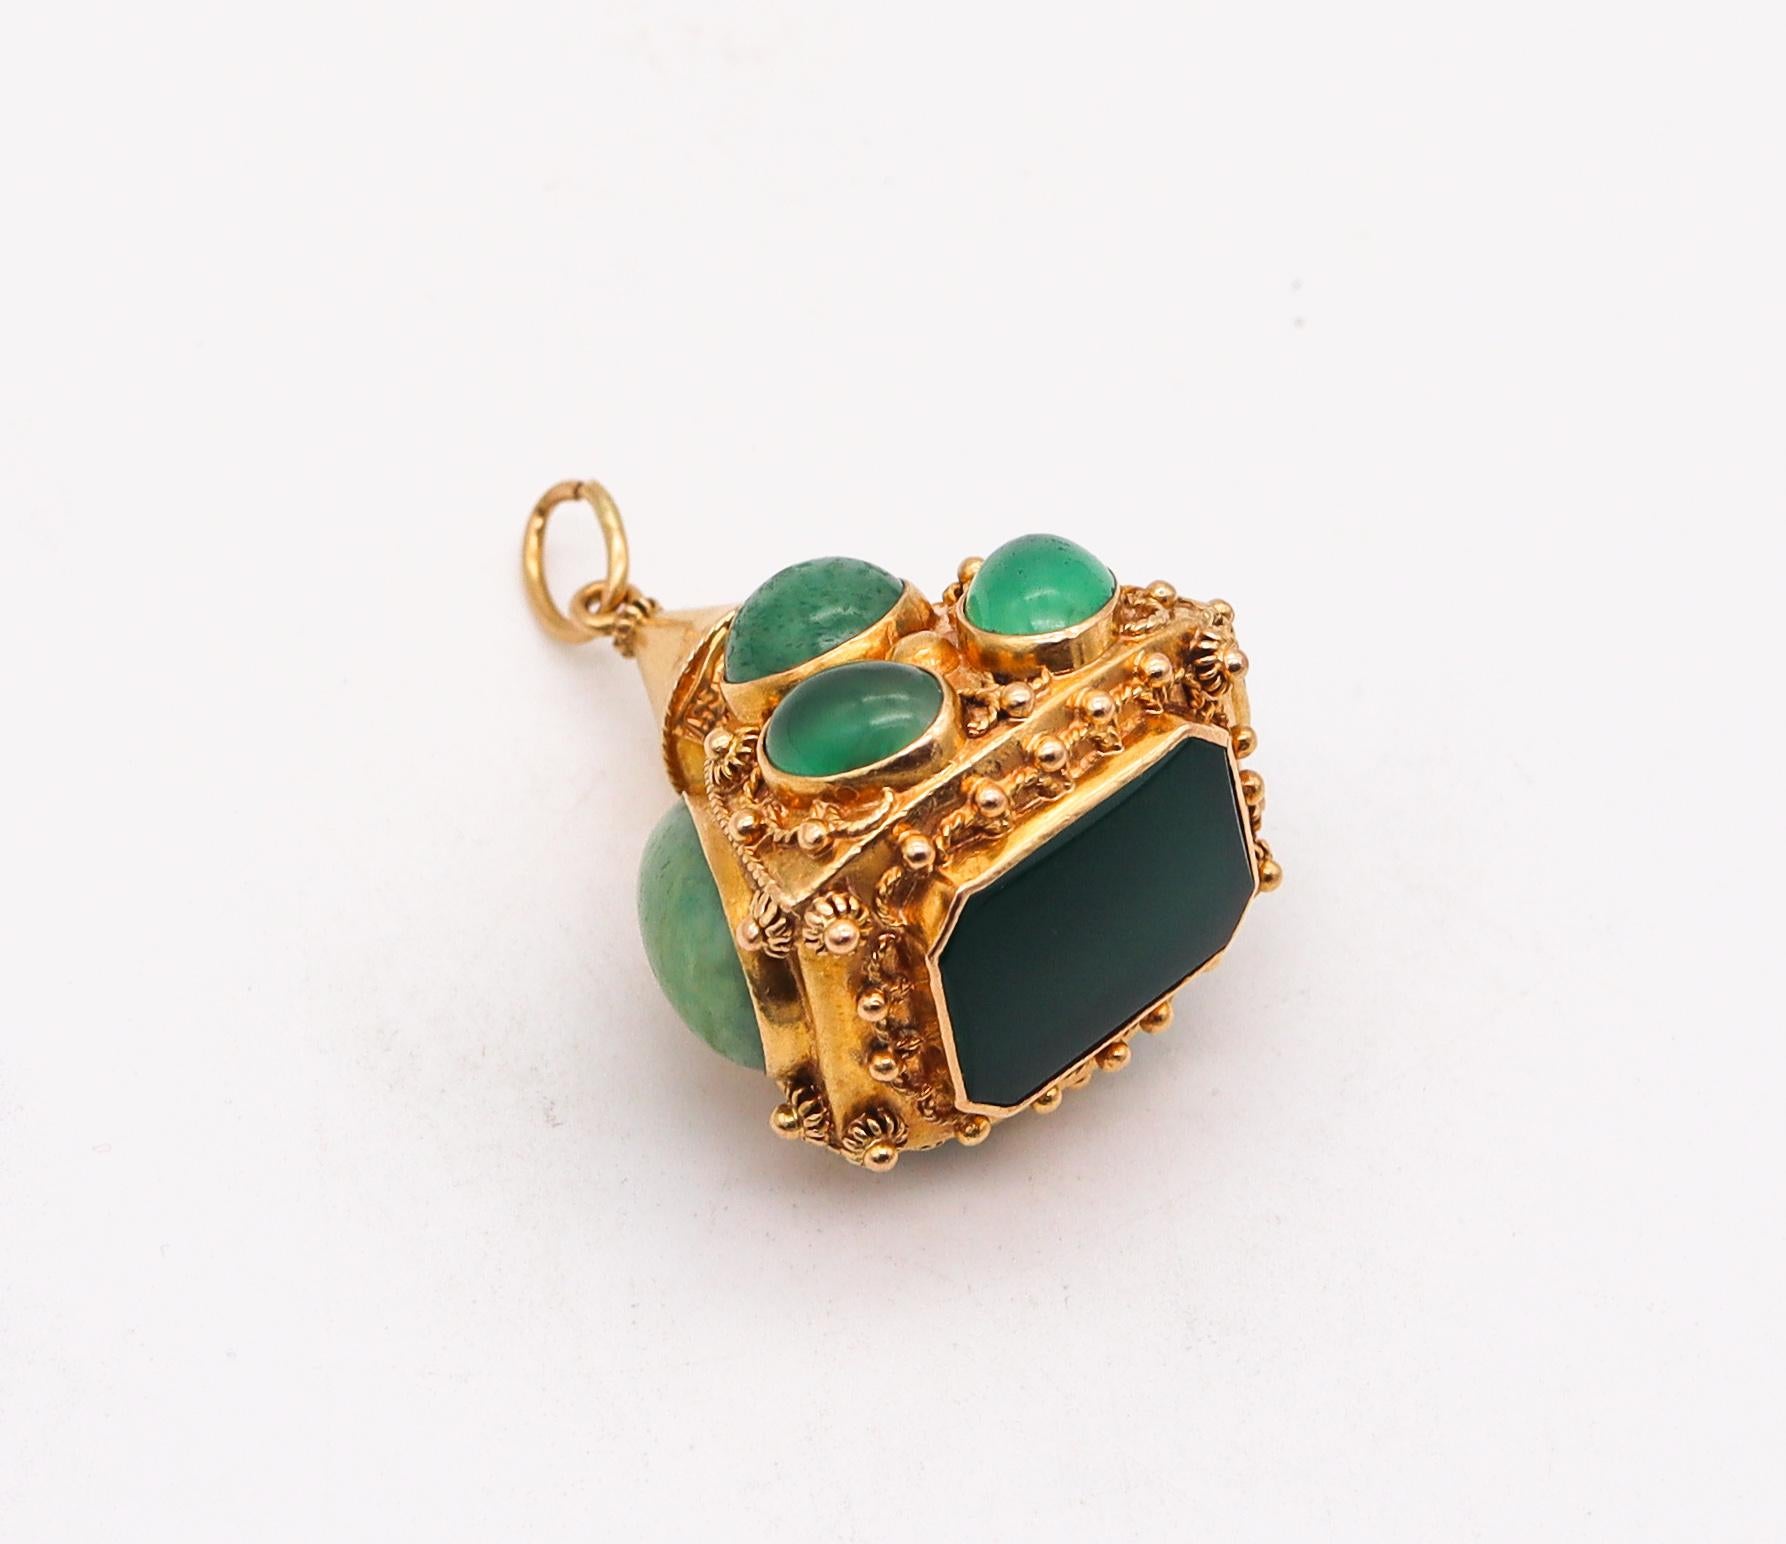 Mixed Cut Italian 1960 Vintage Etruscan Revival Gem Set Charm in Solid 18kt Yellow Gold